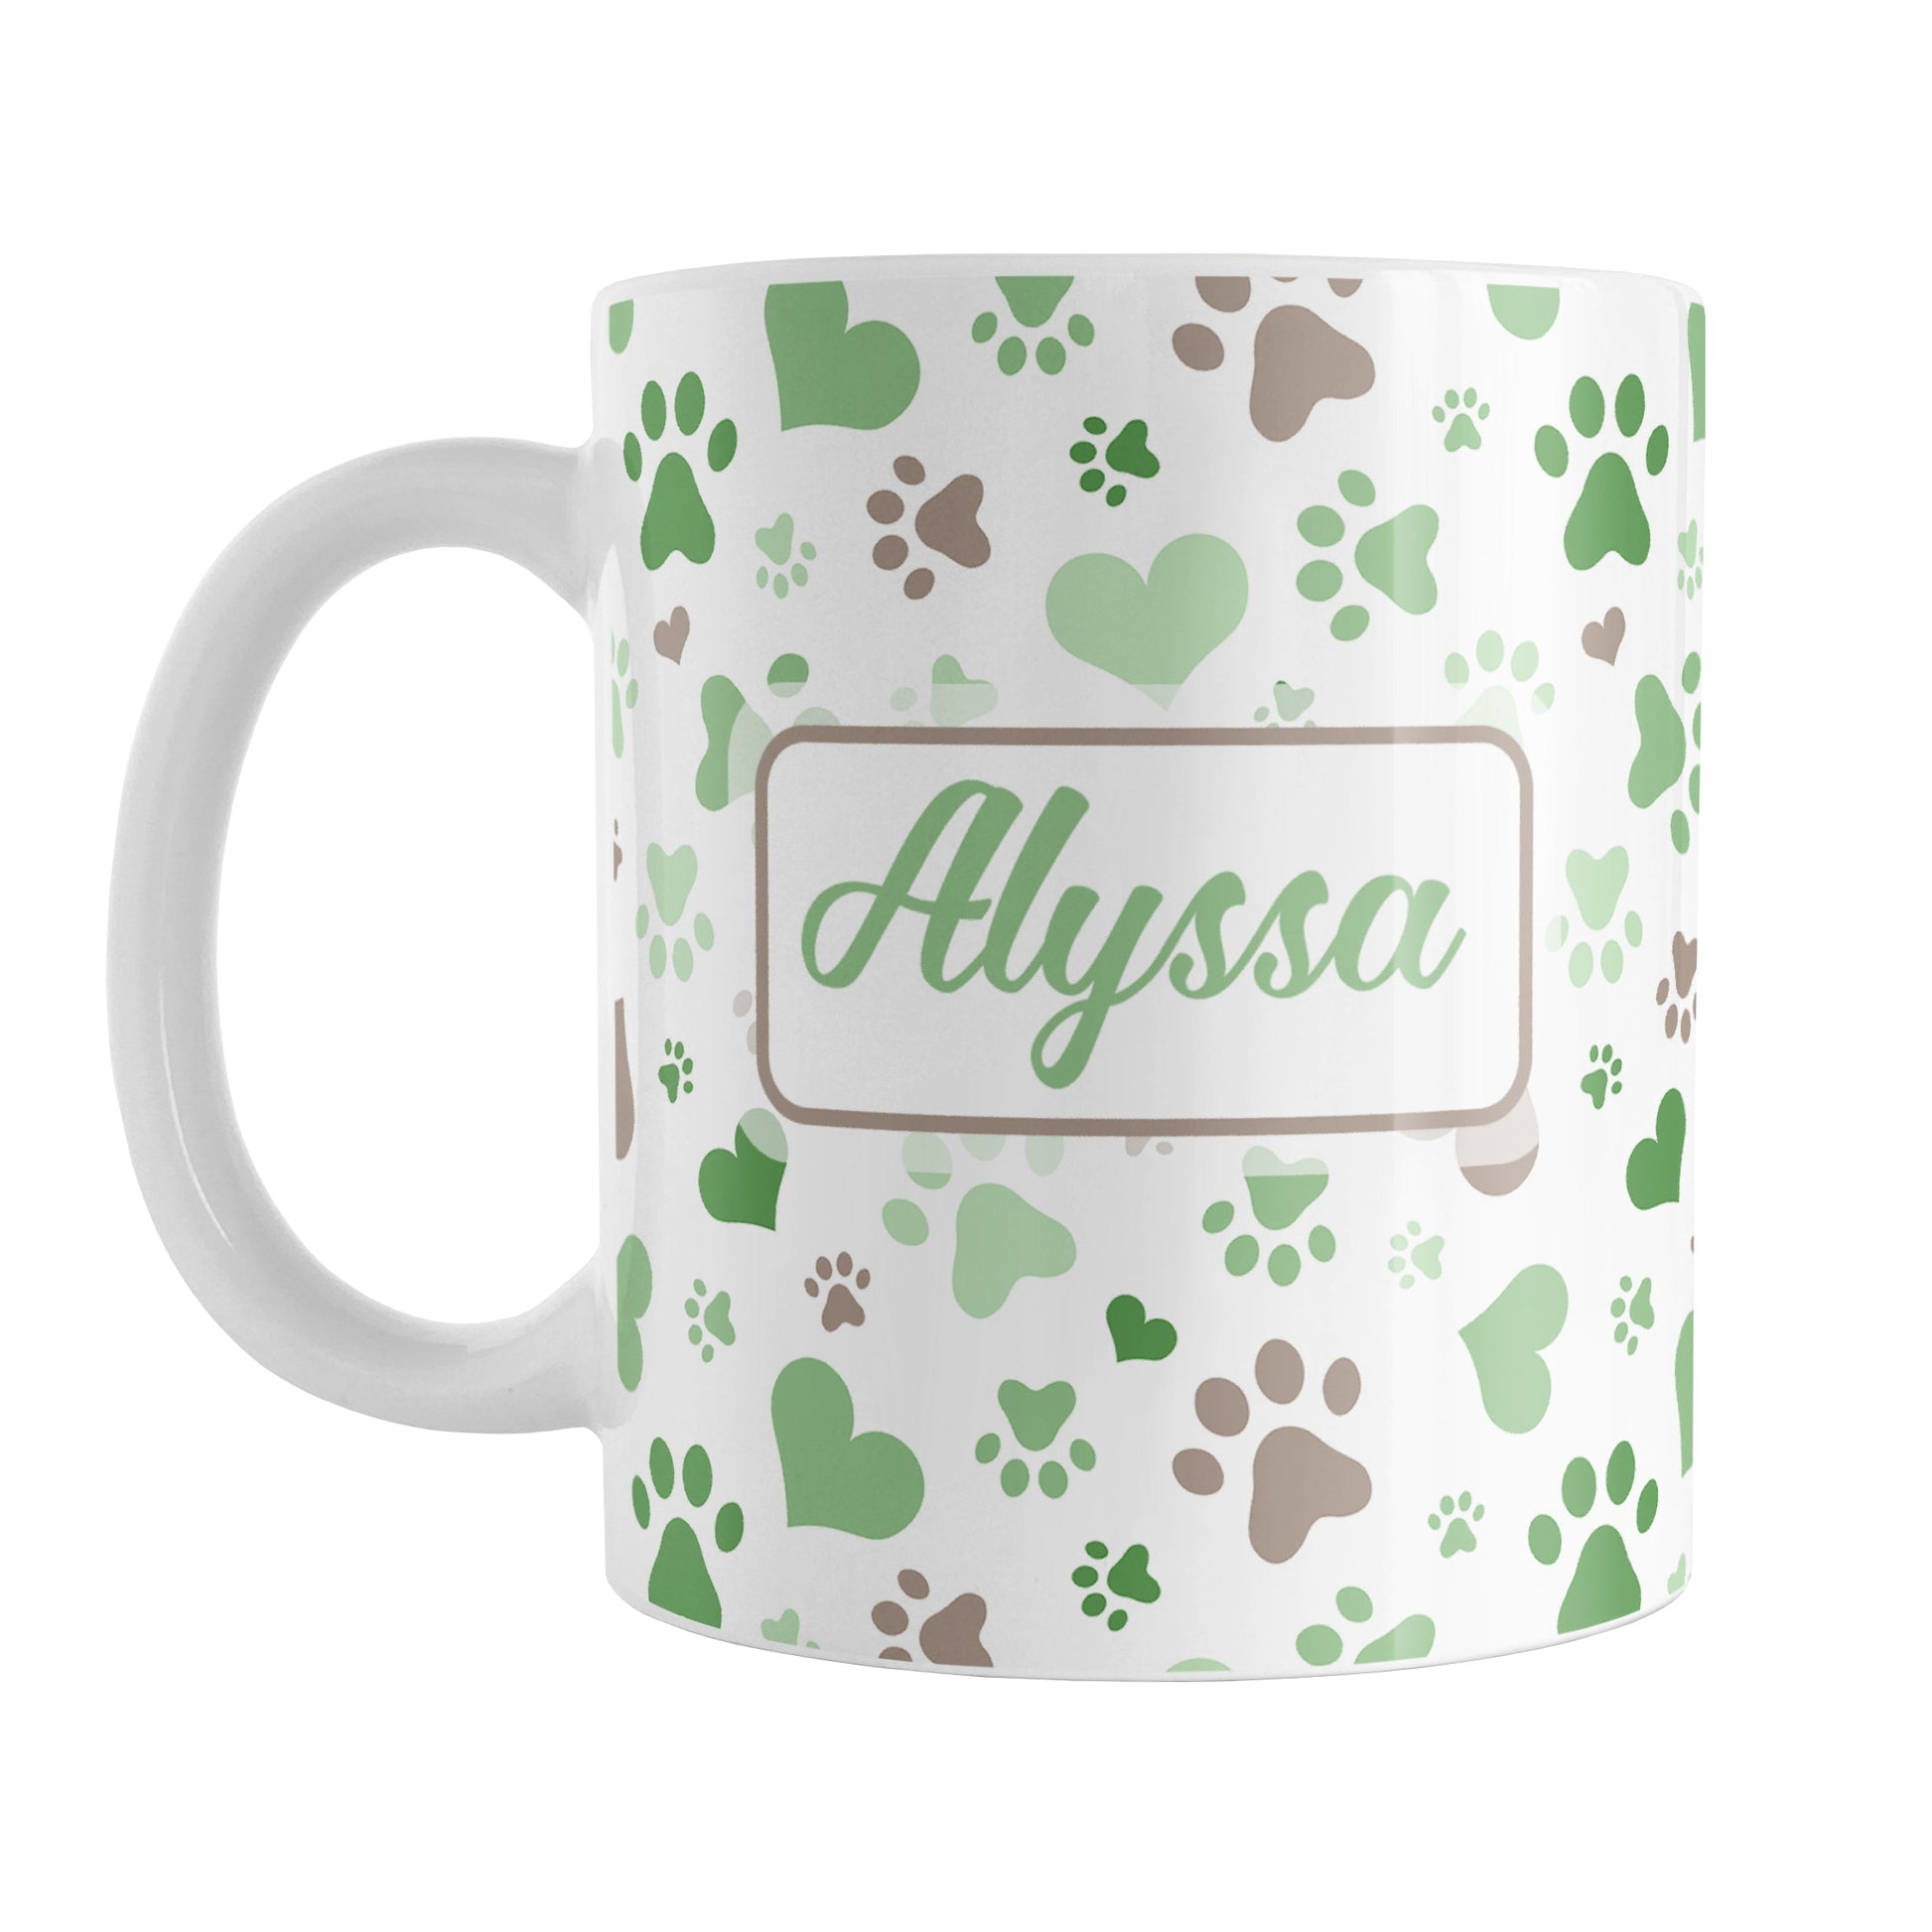 Personalized Green Hearts and Paw Prints Mug (11oz) at Amy's Coffee Mugs. A ceramic coffee mug designed with a pattern of hearts and paw prints in green and brown that wraps around the mug to the handle. Your name is personalized in green on both sides of the mug.